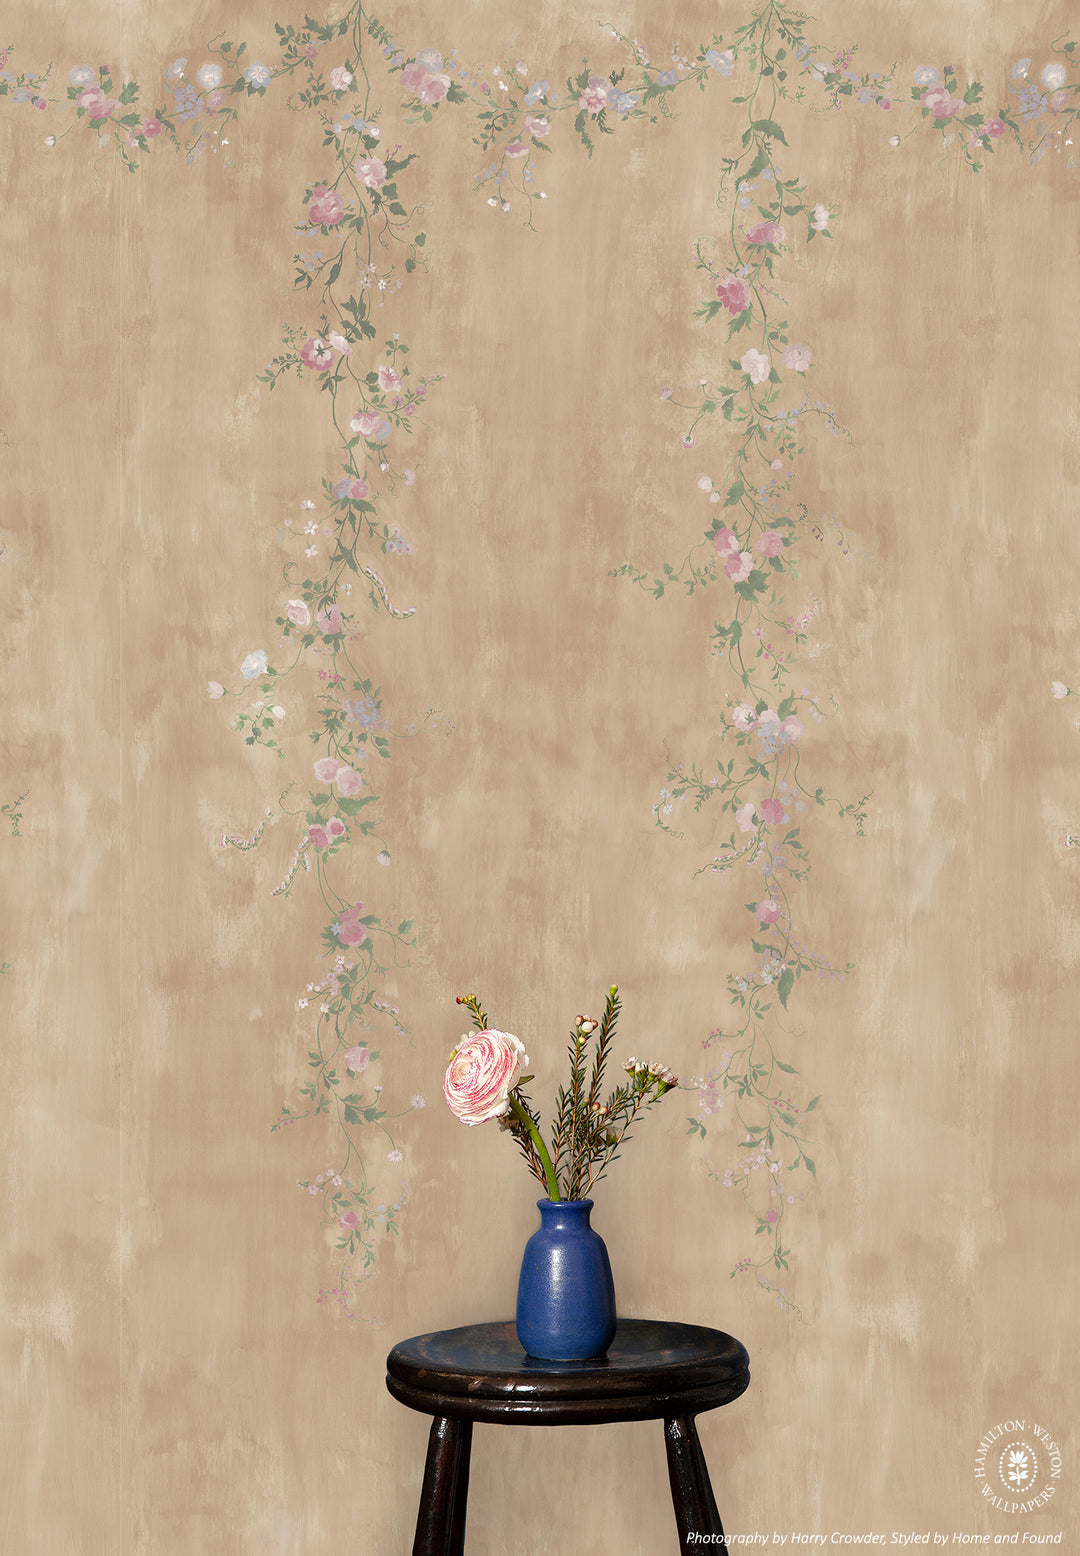 Floral-Roberts-Hamilton-Weston-wallpaper-trailing-flowers-Garland-hand-illustrated-panel-walls-mural-floral-Garland-painterly-pale-sienna-02